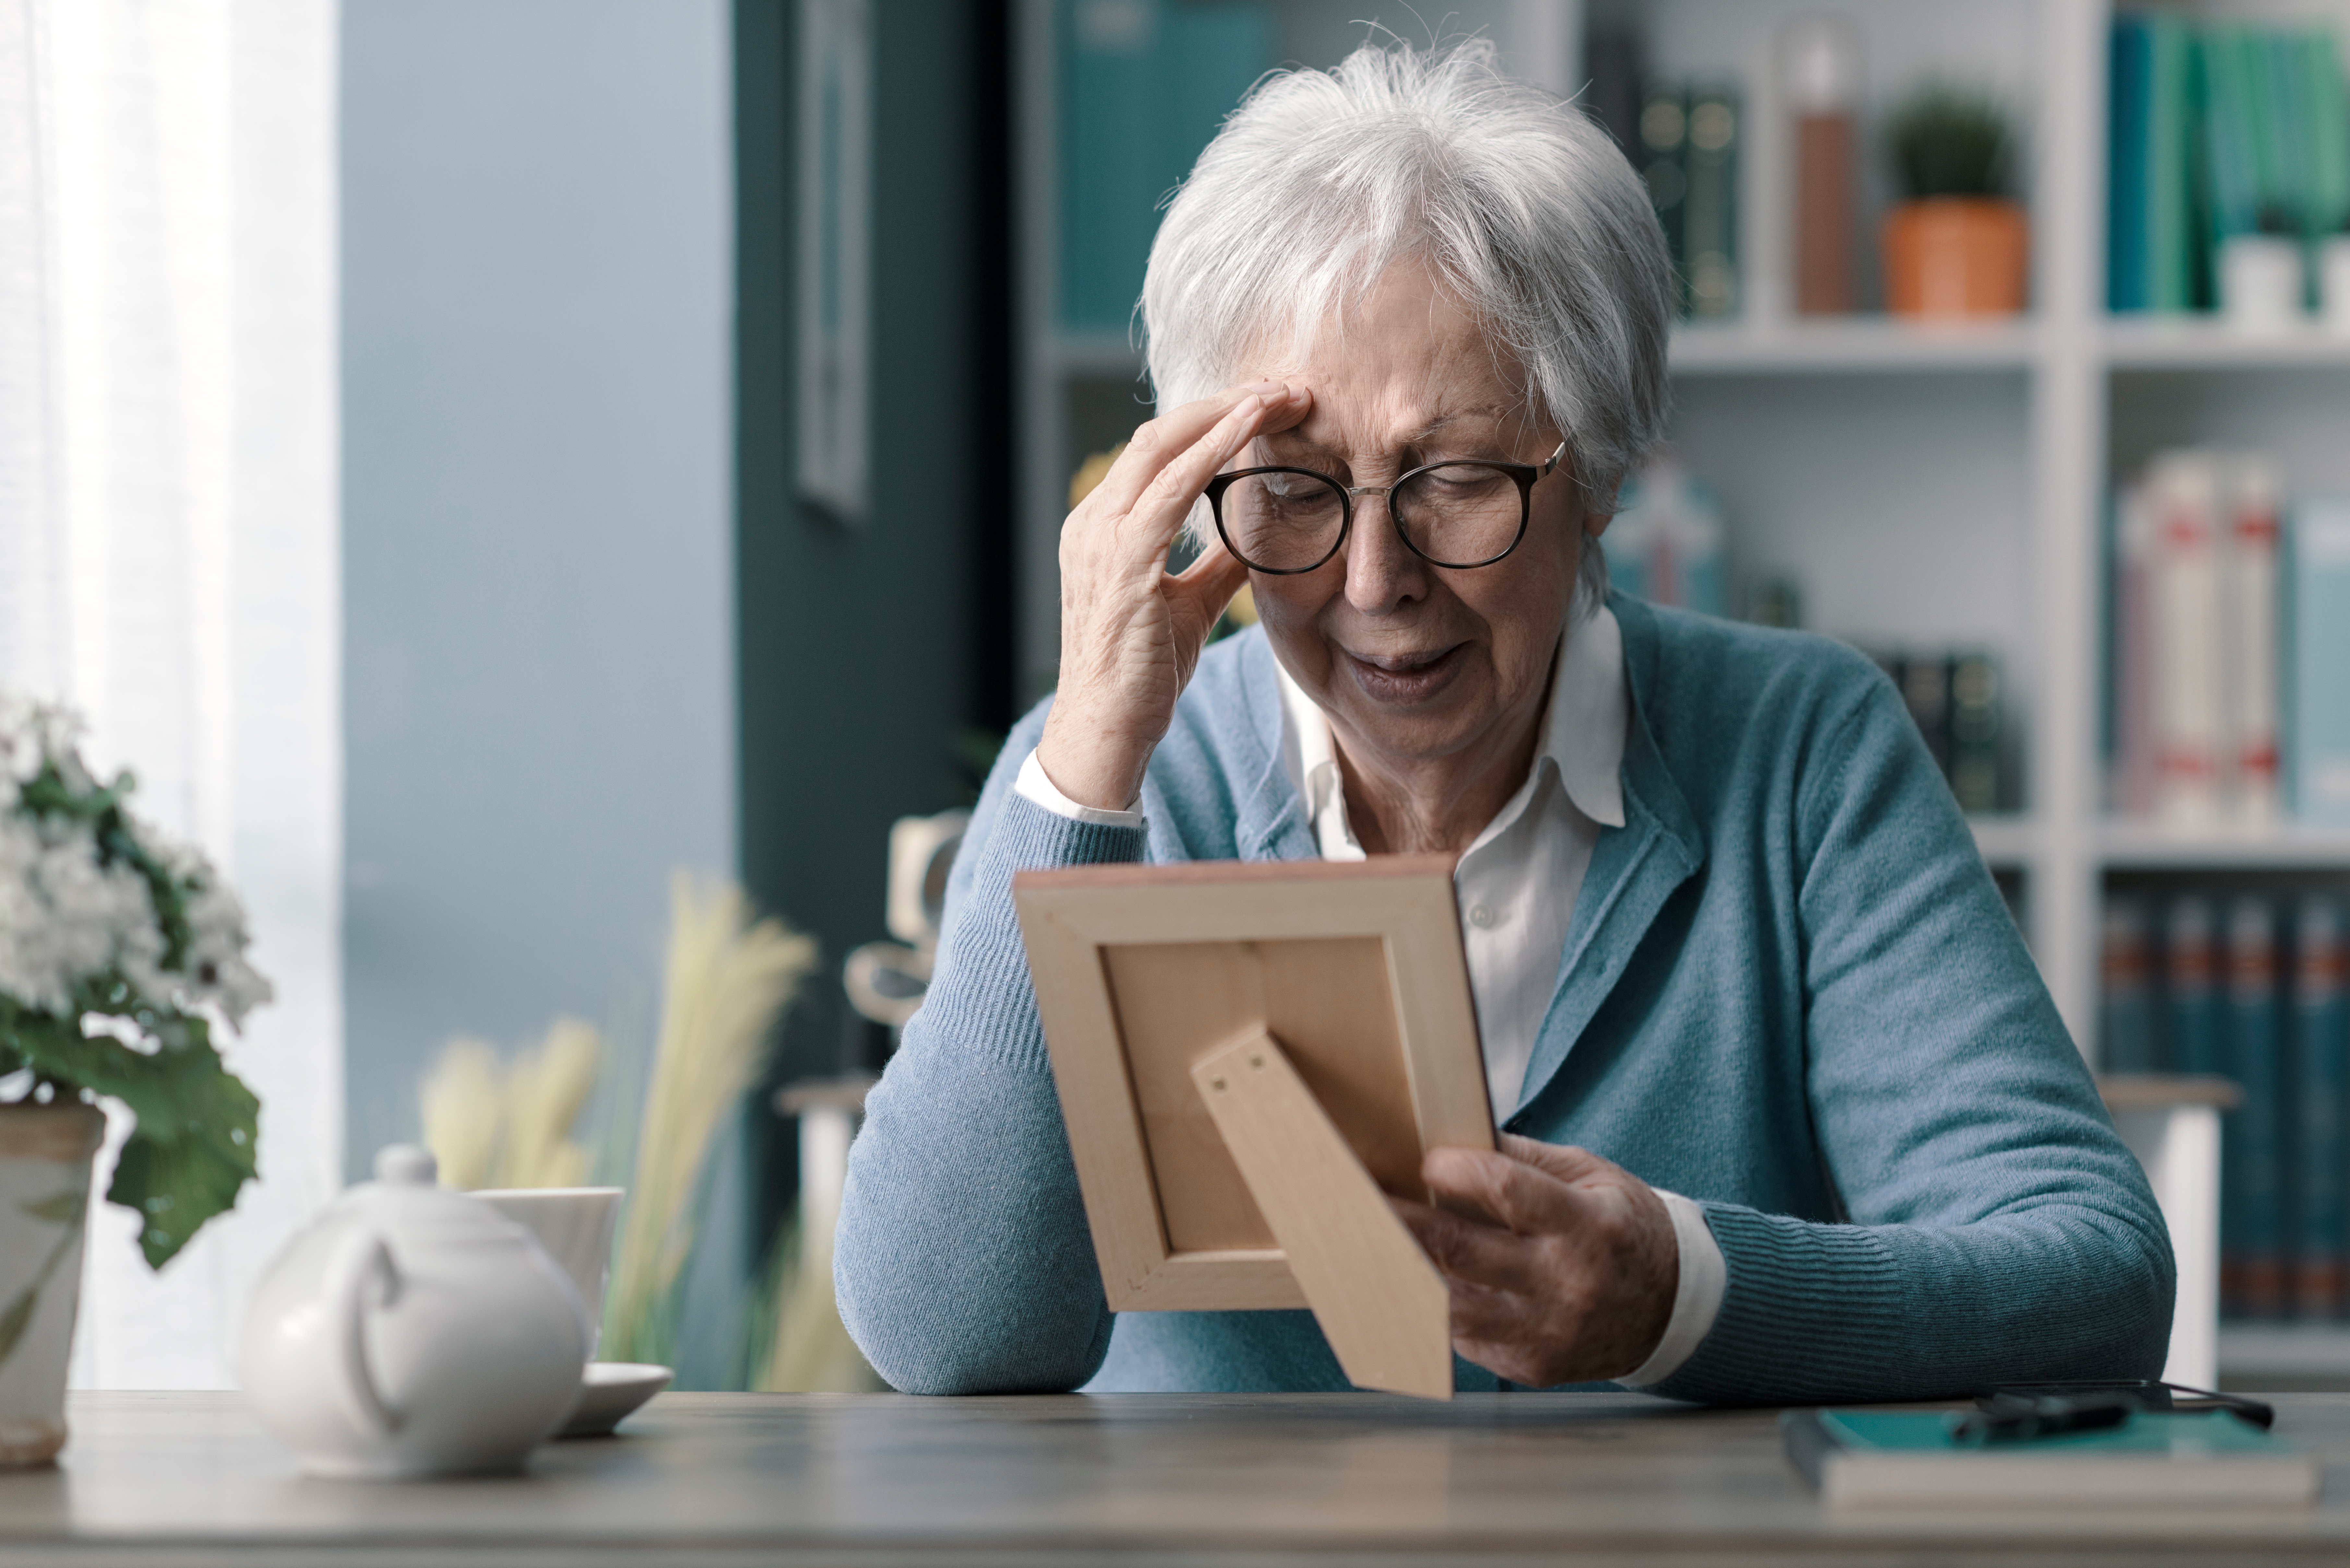 An older woman looks at the photo | Source: Shutterstock